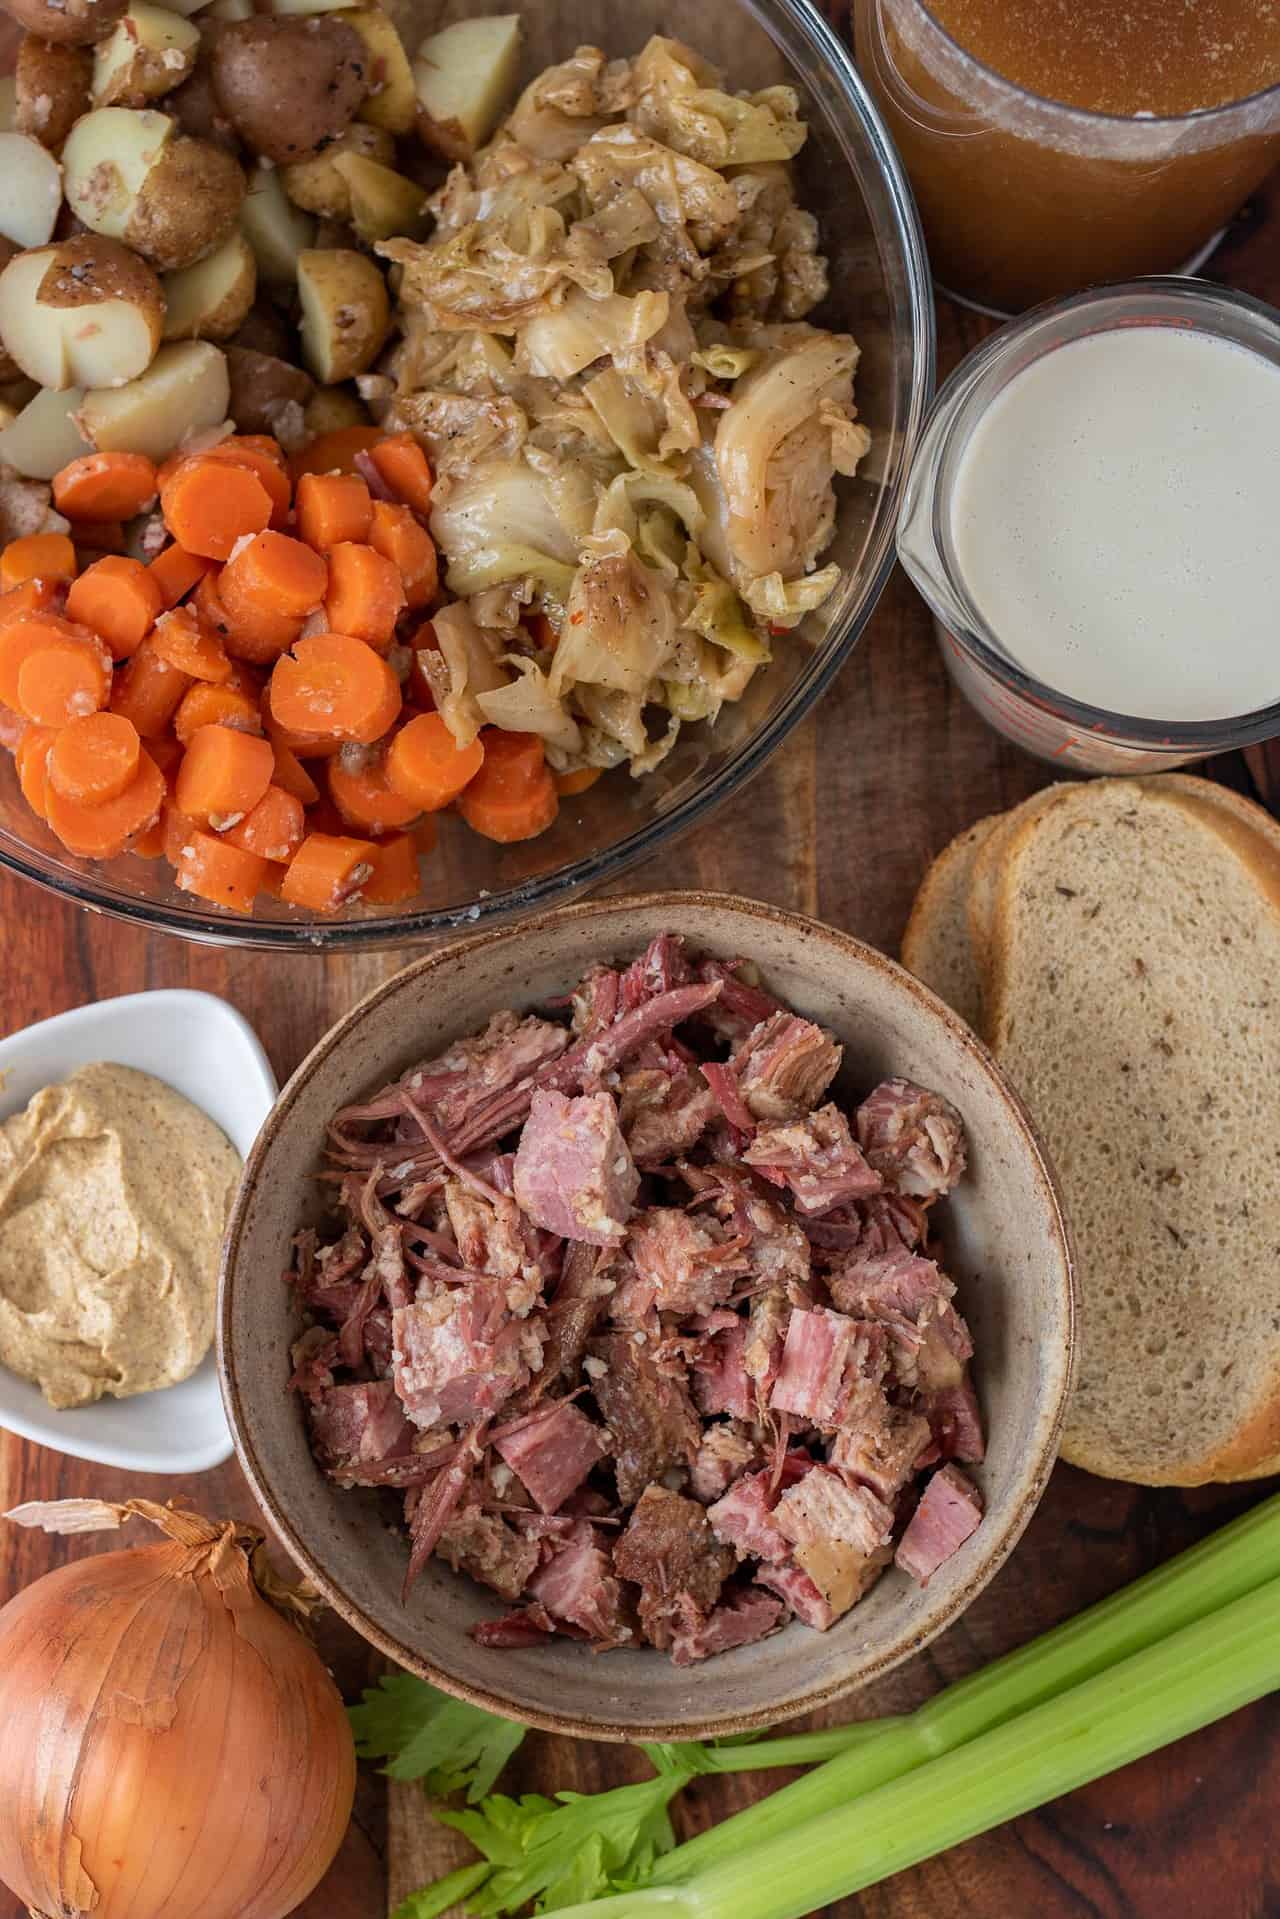 A wooden surface topped with corned beef soup ingredients. A bowl of cubed corned beef, a small dish of mustard, slices of rye bread, and a large bowl with sliced carrots, cabbage and potatoes. A measuring cup filled with milk is also on the wooden surface.